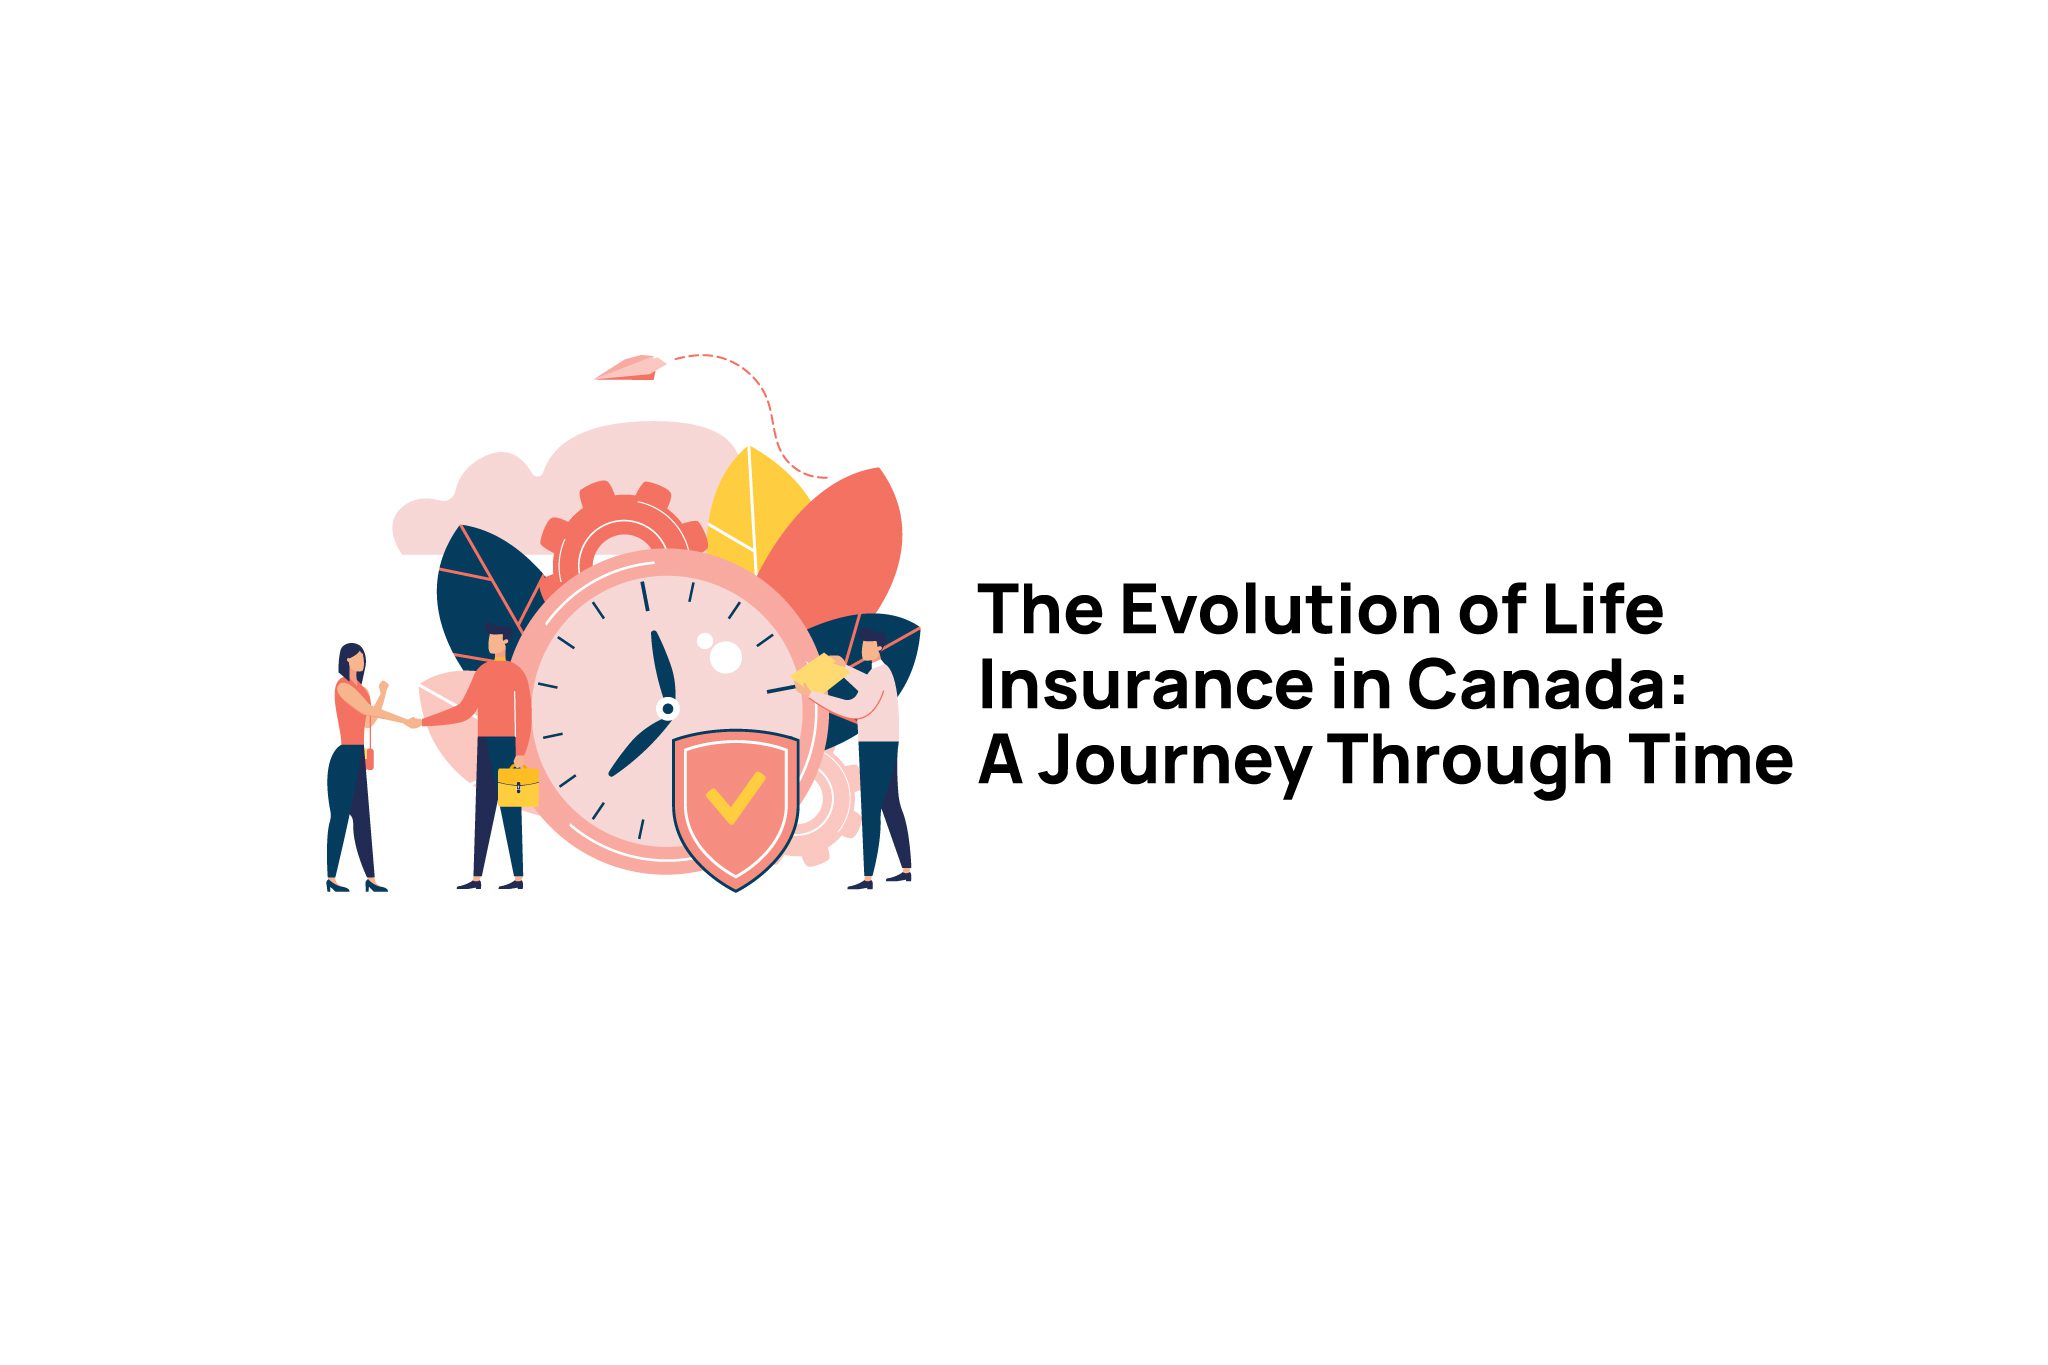 The Evolution of Life Insurance in Canada: A Journey Through Time